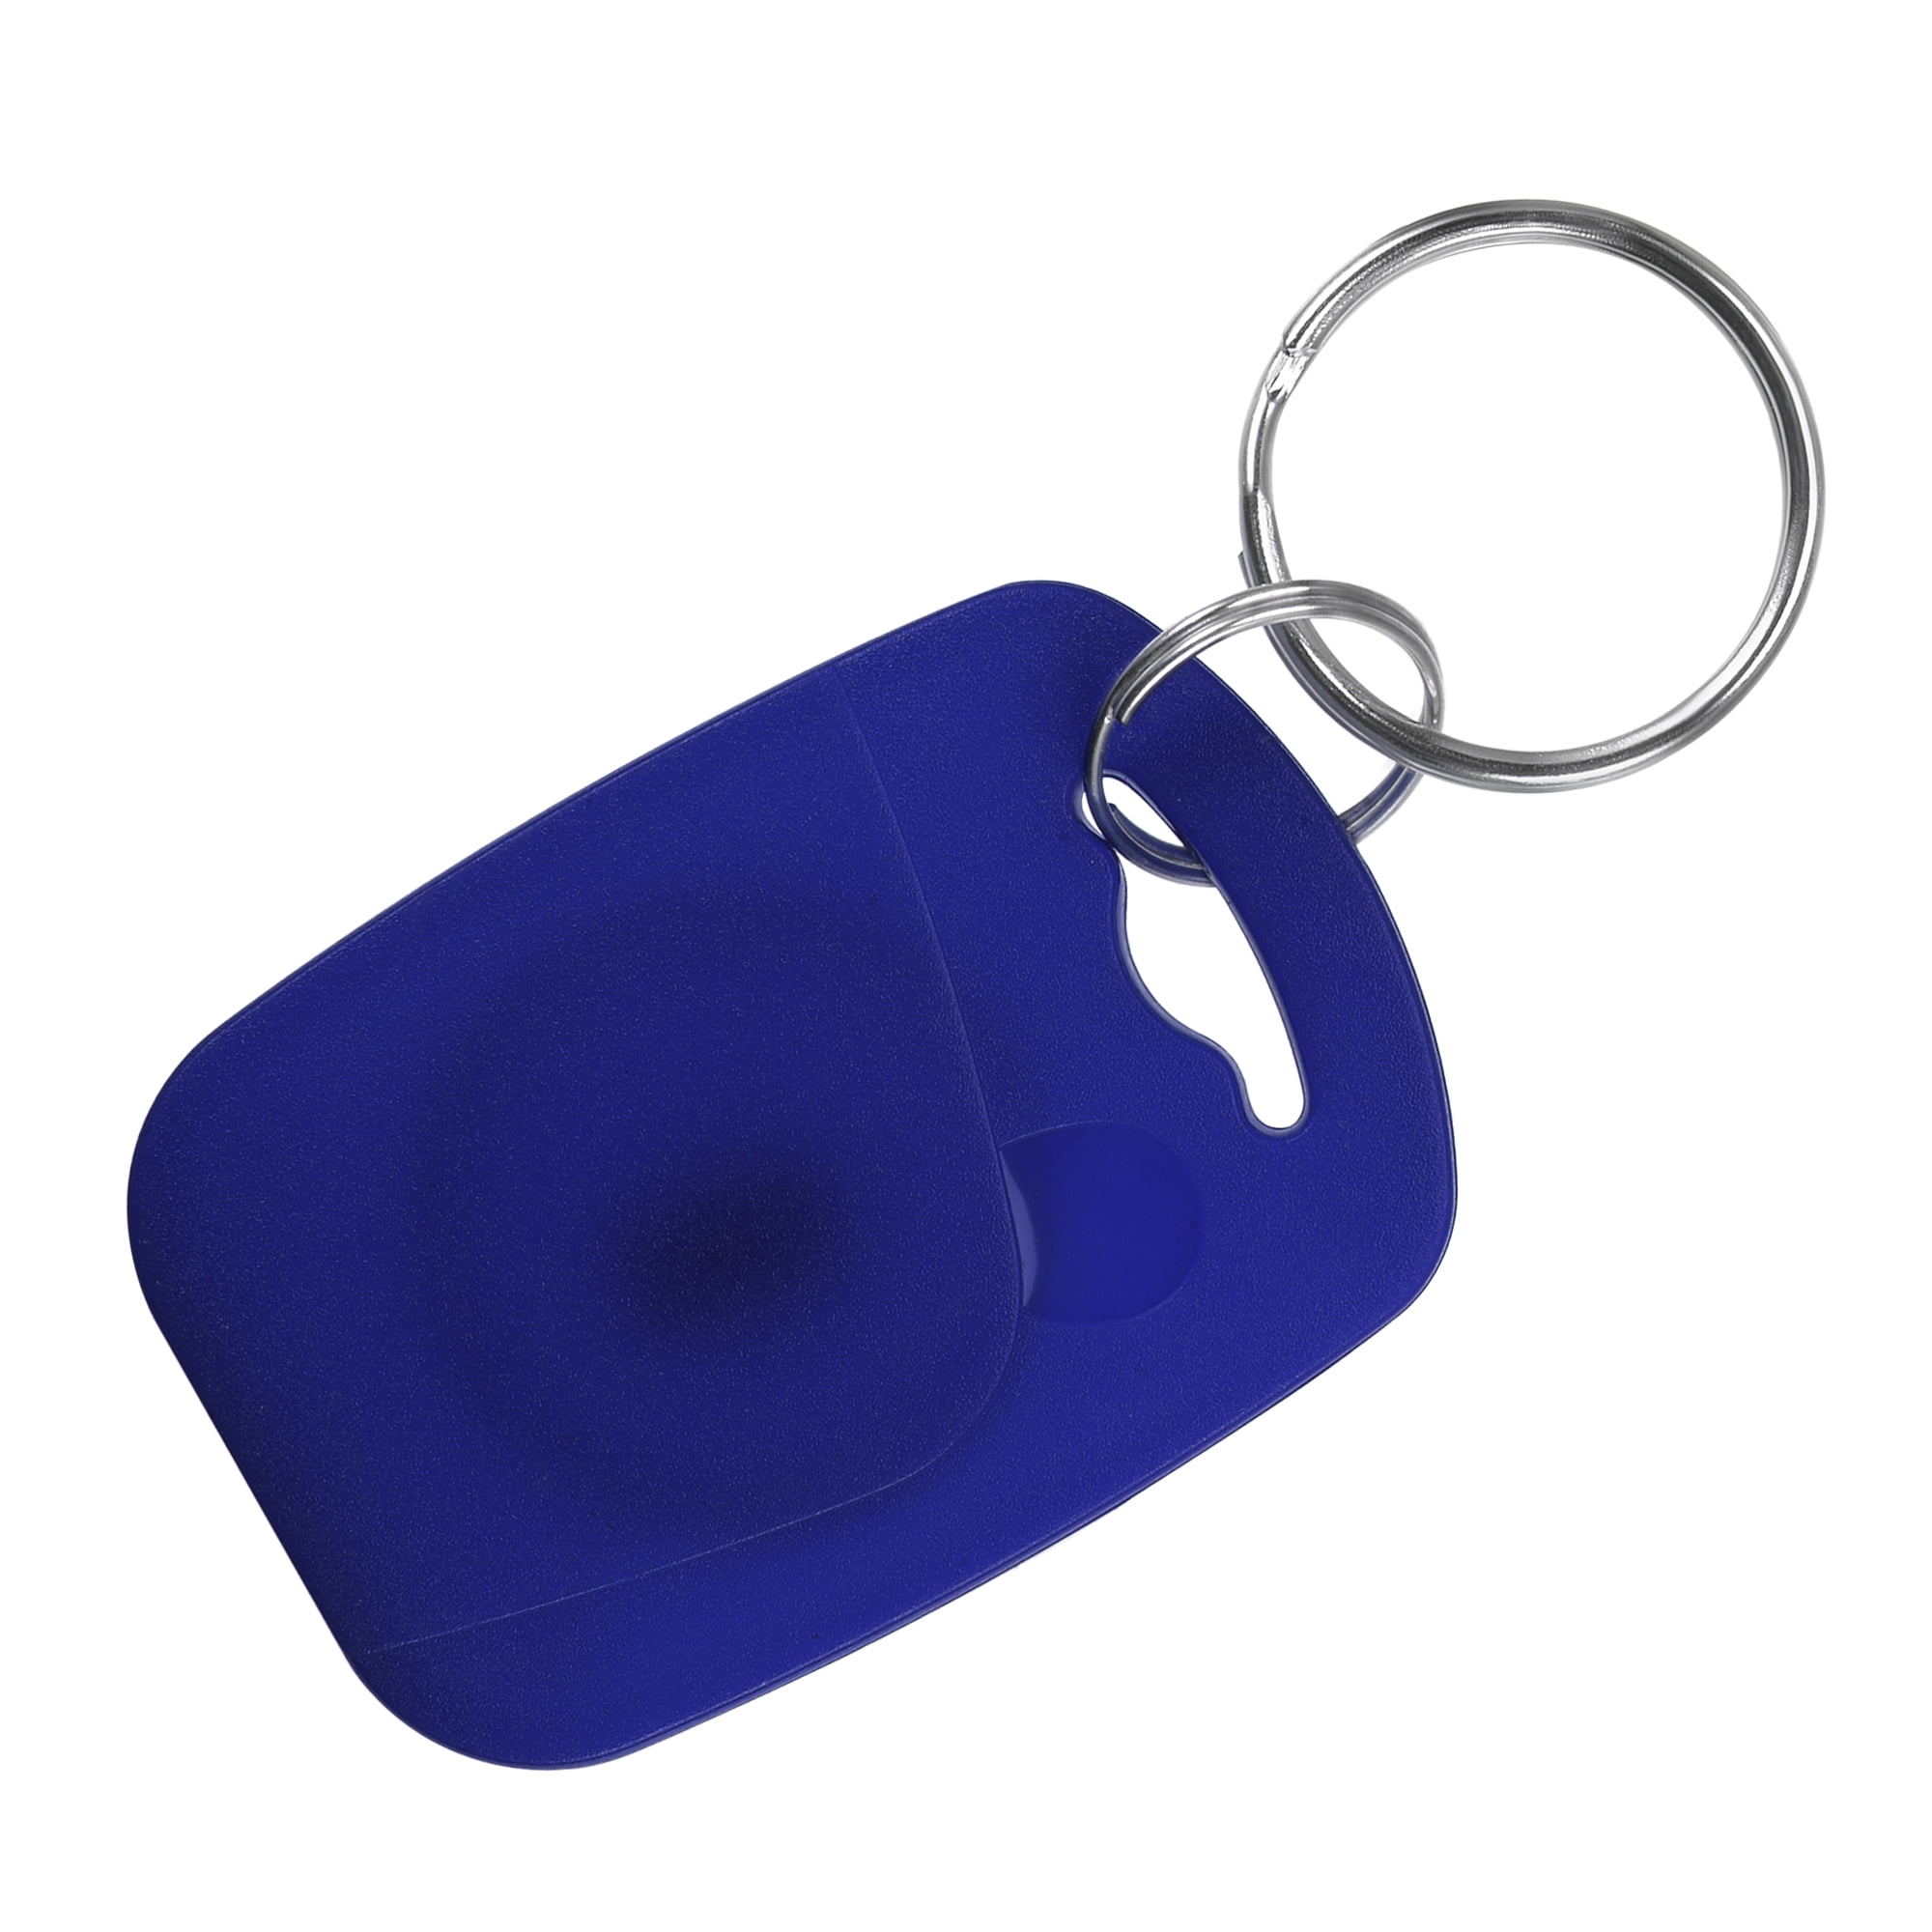 13.56mhz RFIC IC Tag Keyfob Card With Metal Ring Waterproof For Access Control. 